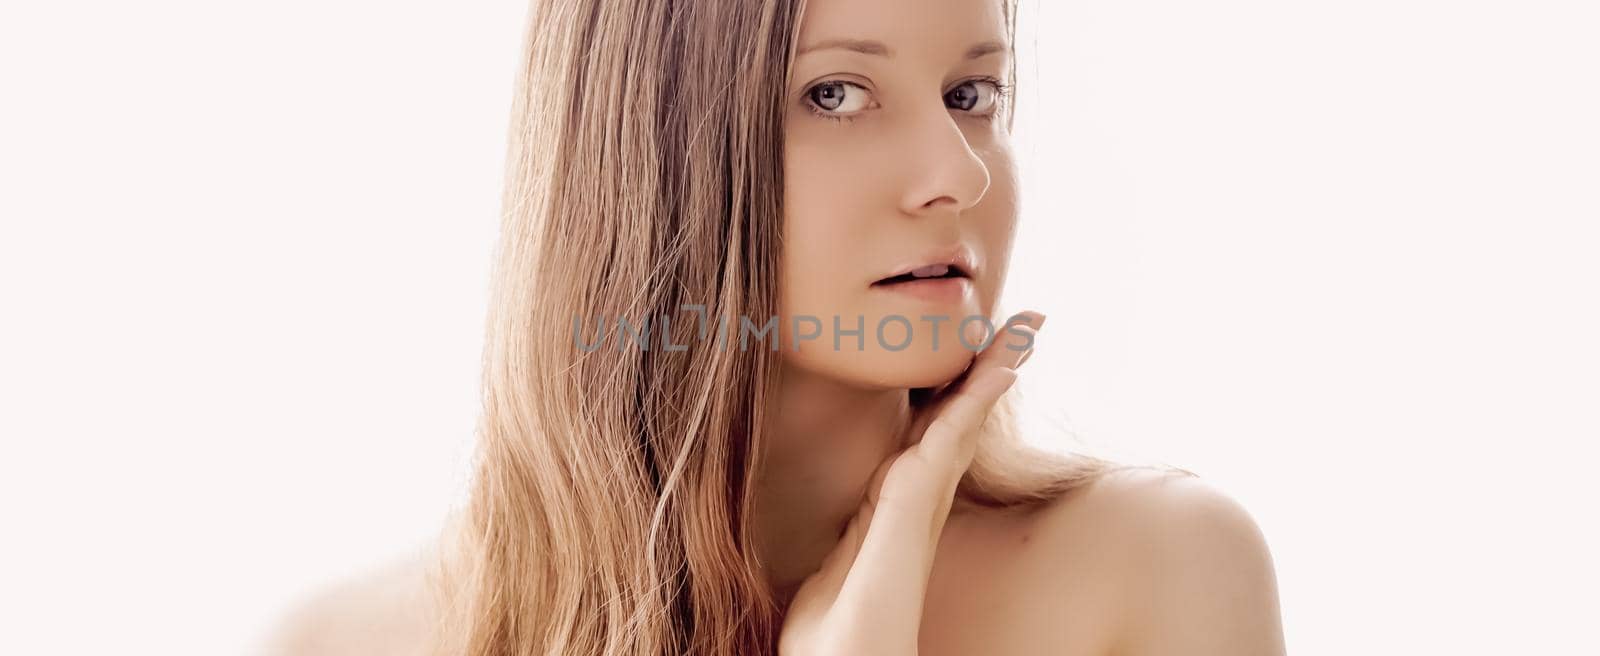 Beautiful woman with natural look, perfect skin and shiny hair as make-up, health and wellness concept. Face portrait of young female model for skincare cosmetics and luxury beauty ad design.